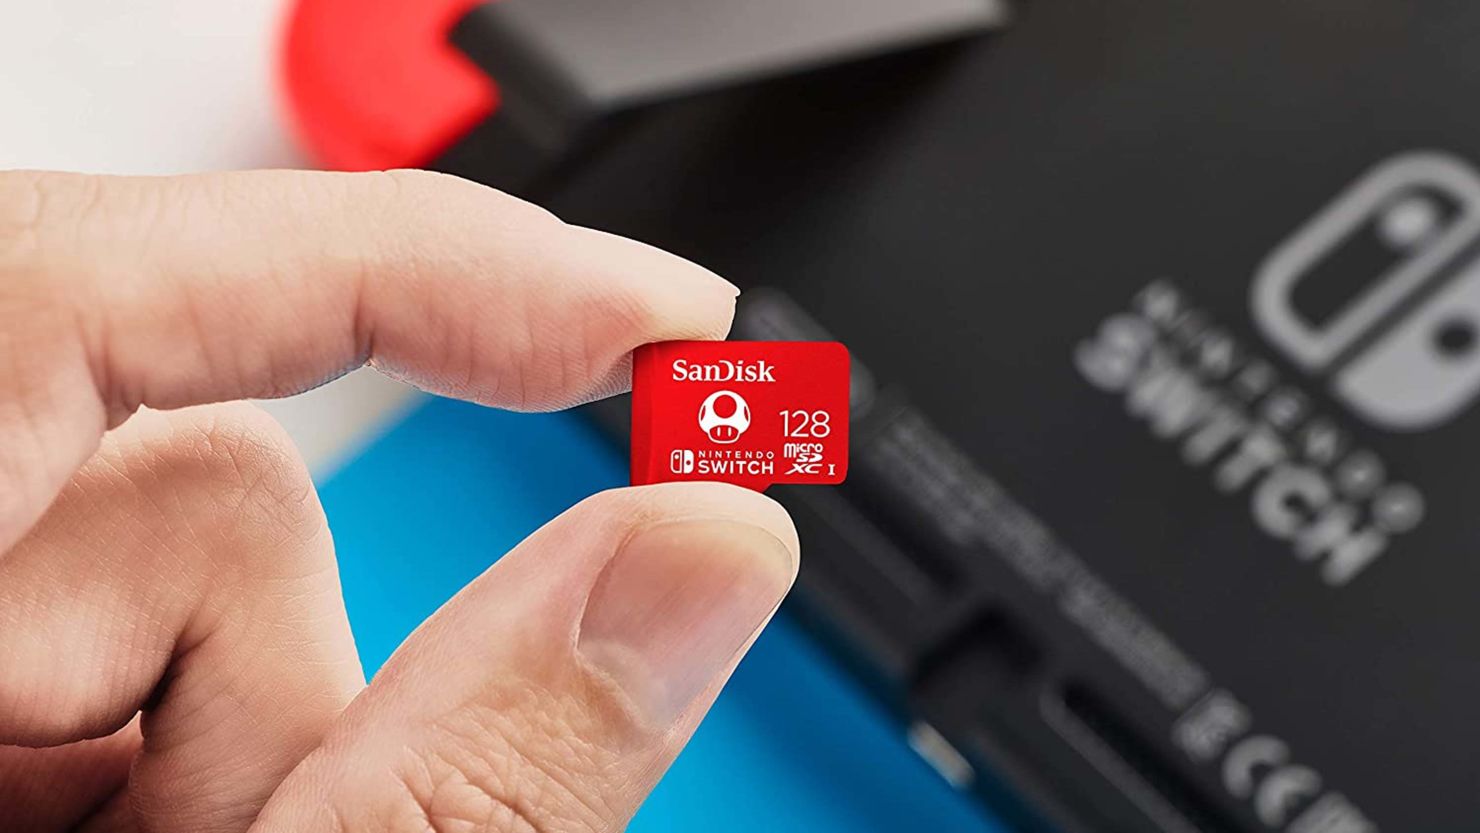 Nintendo Switch Online With 128GB MicroSD Card